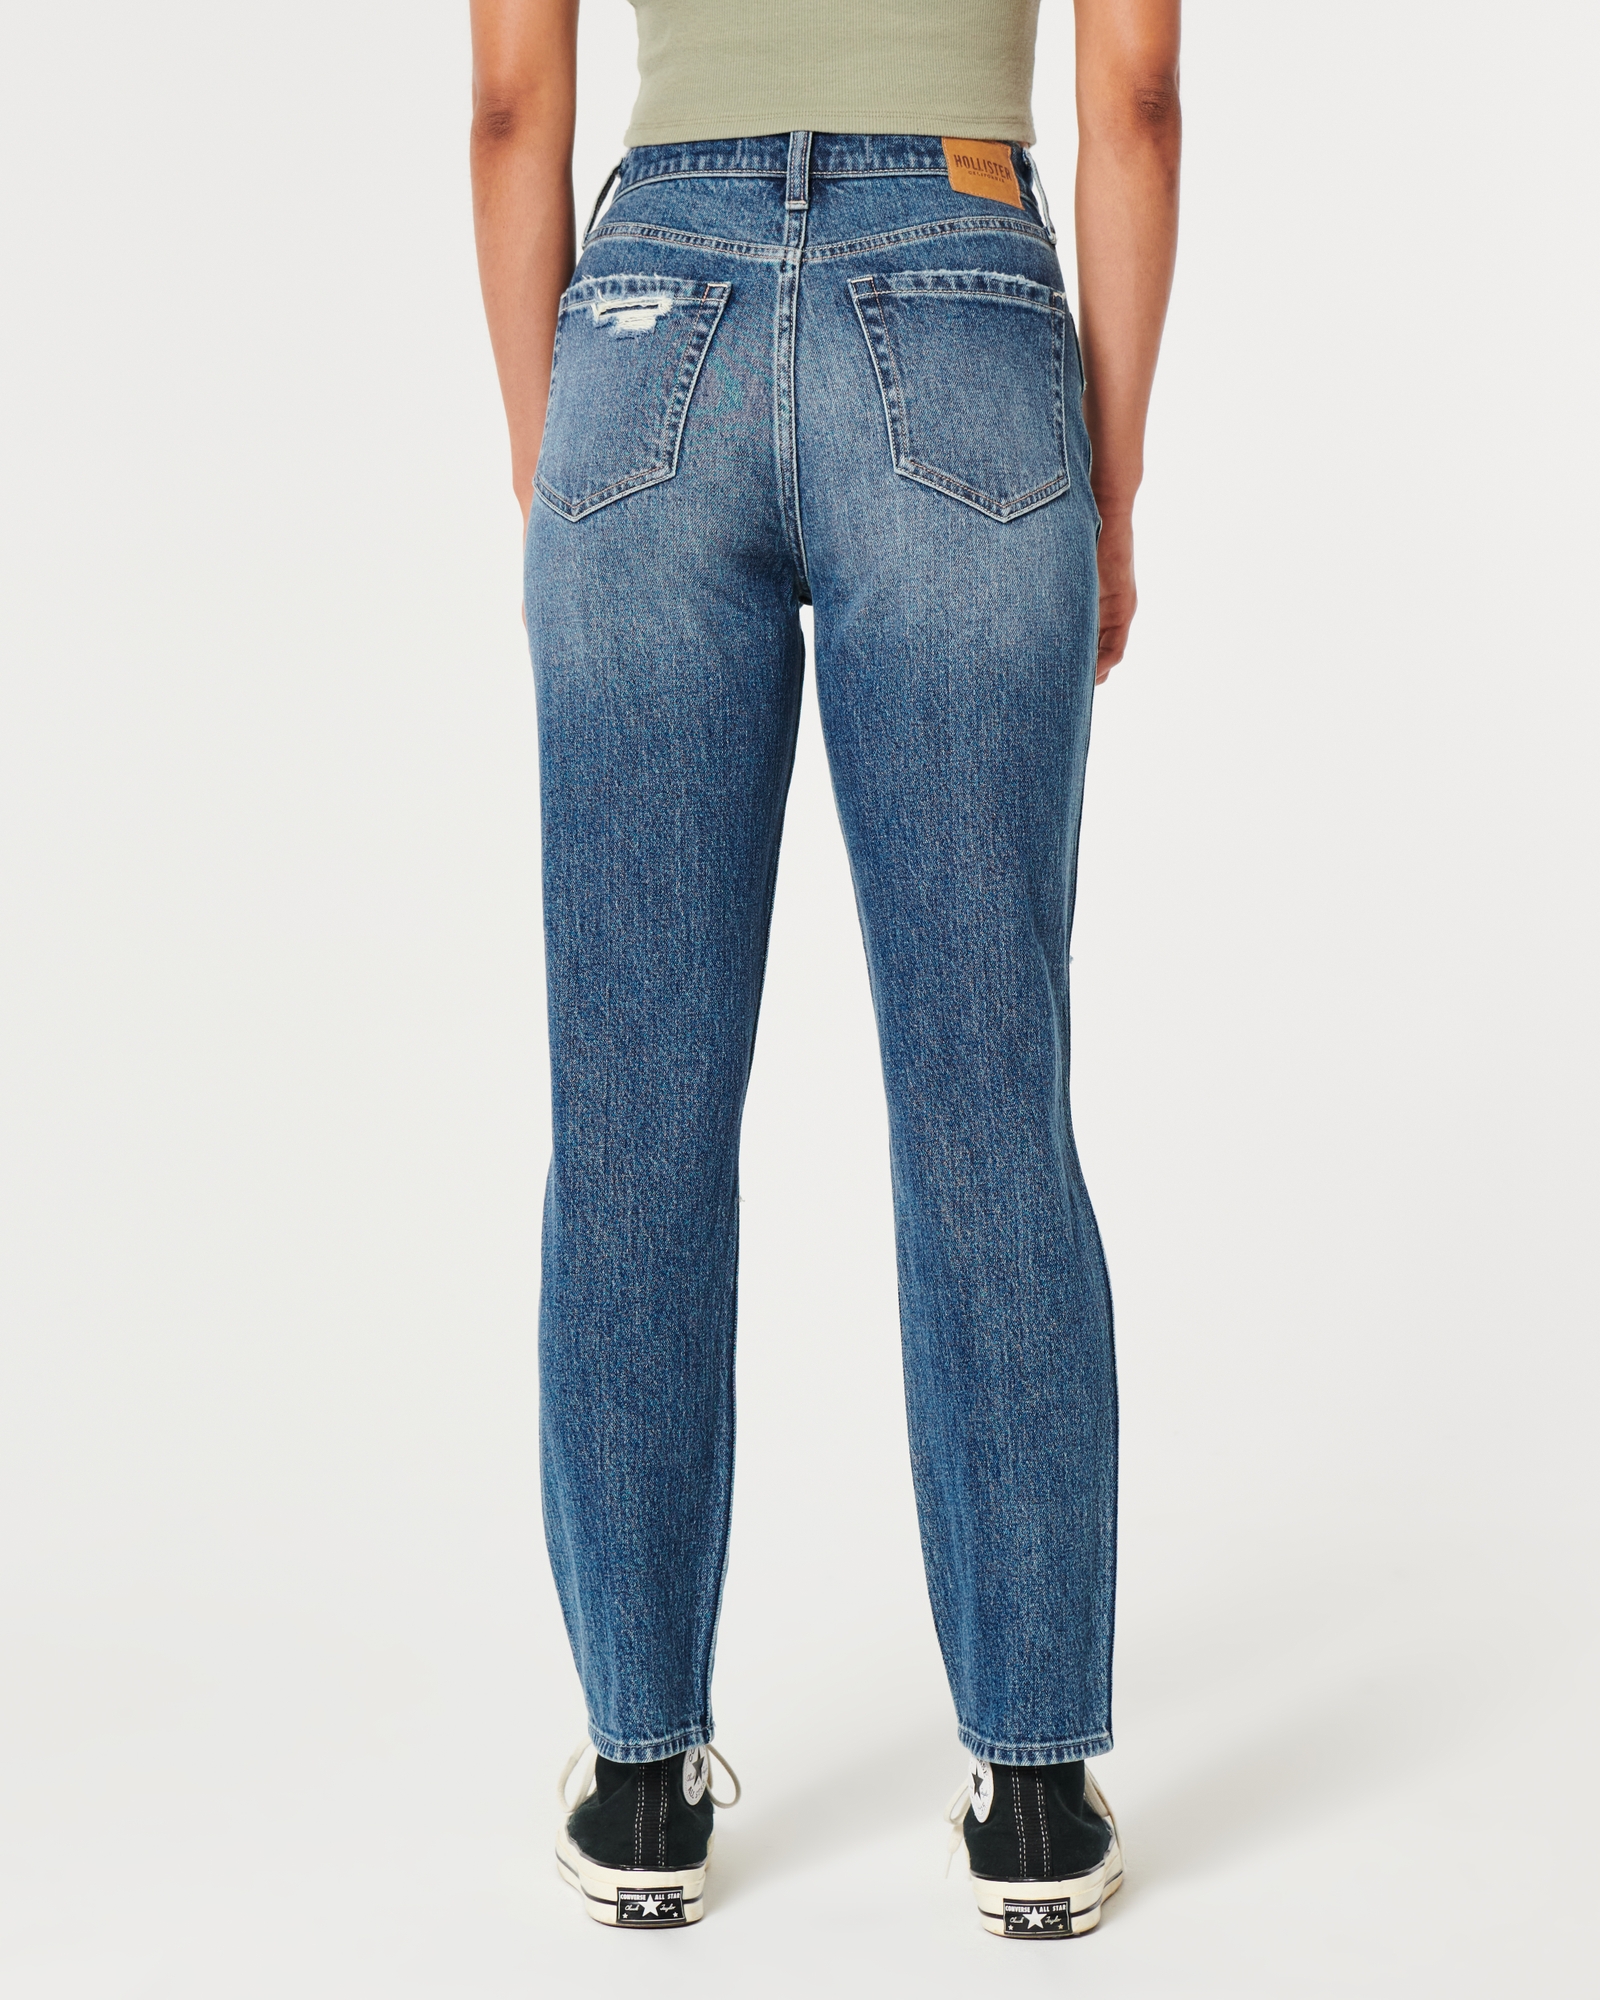 Women's Ultra High-Rise Ripped Medium Wash Mom Jeans - Hollister